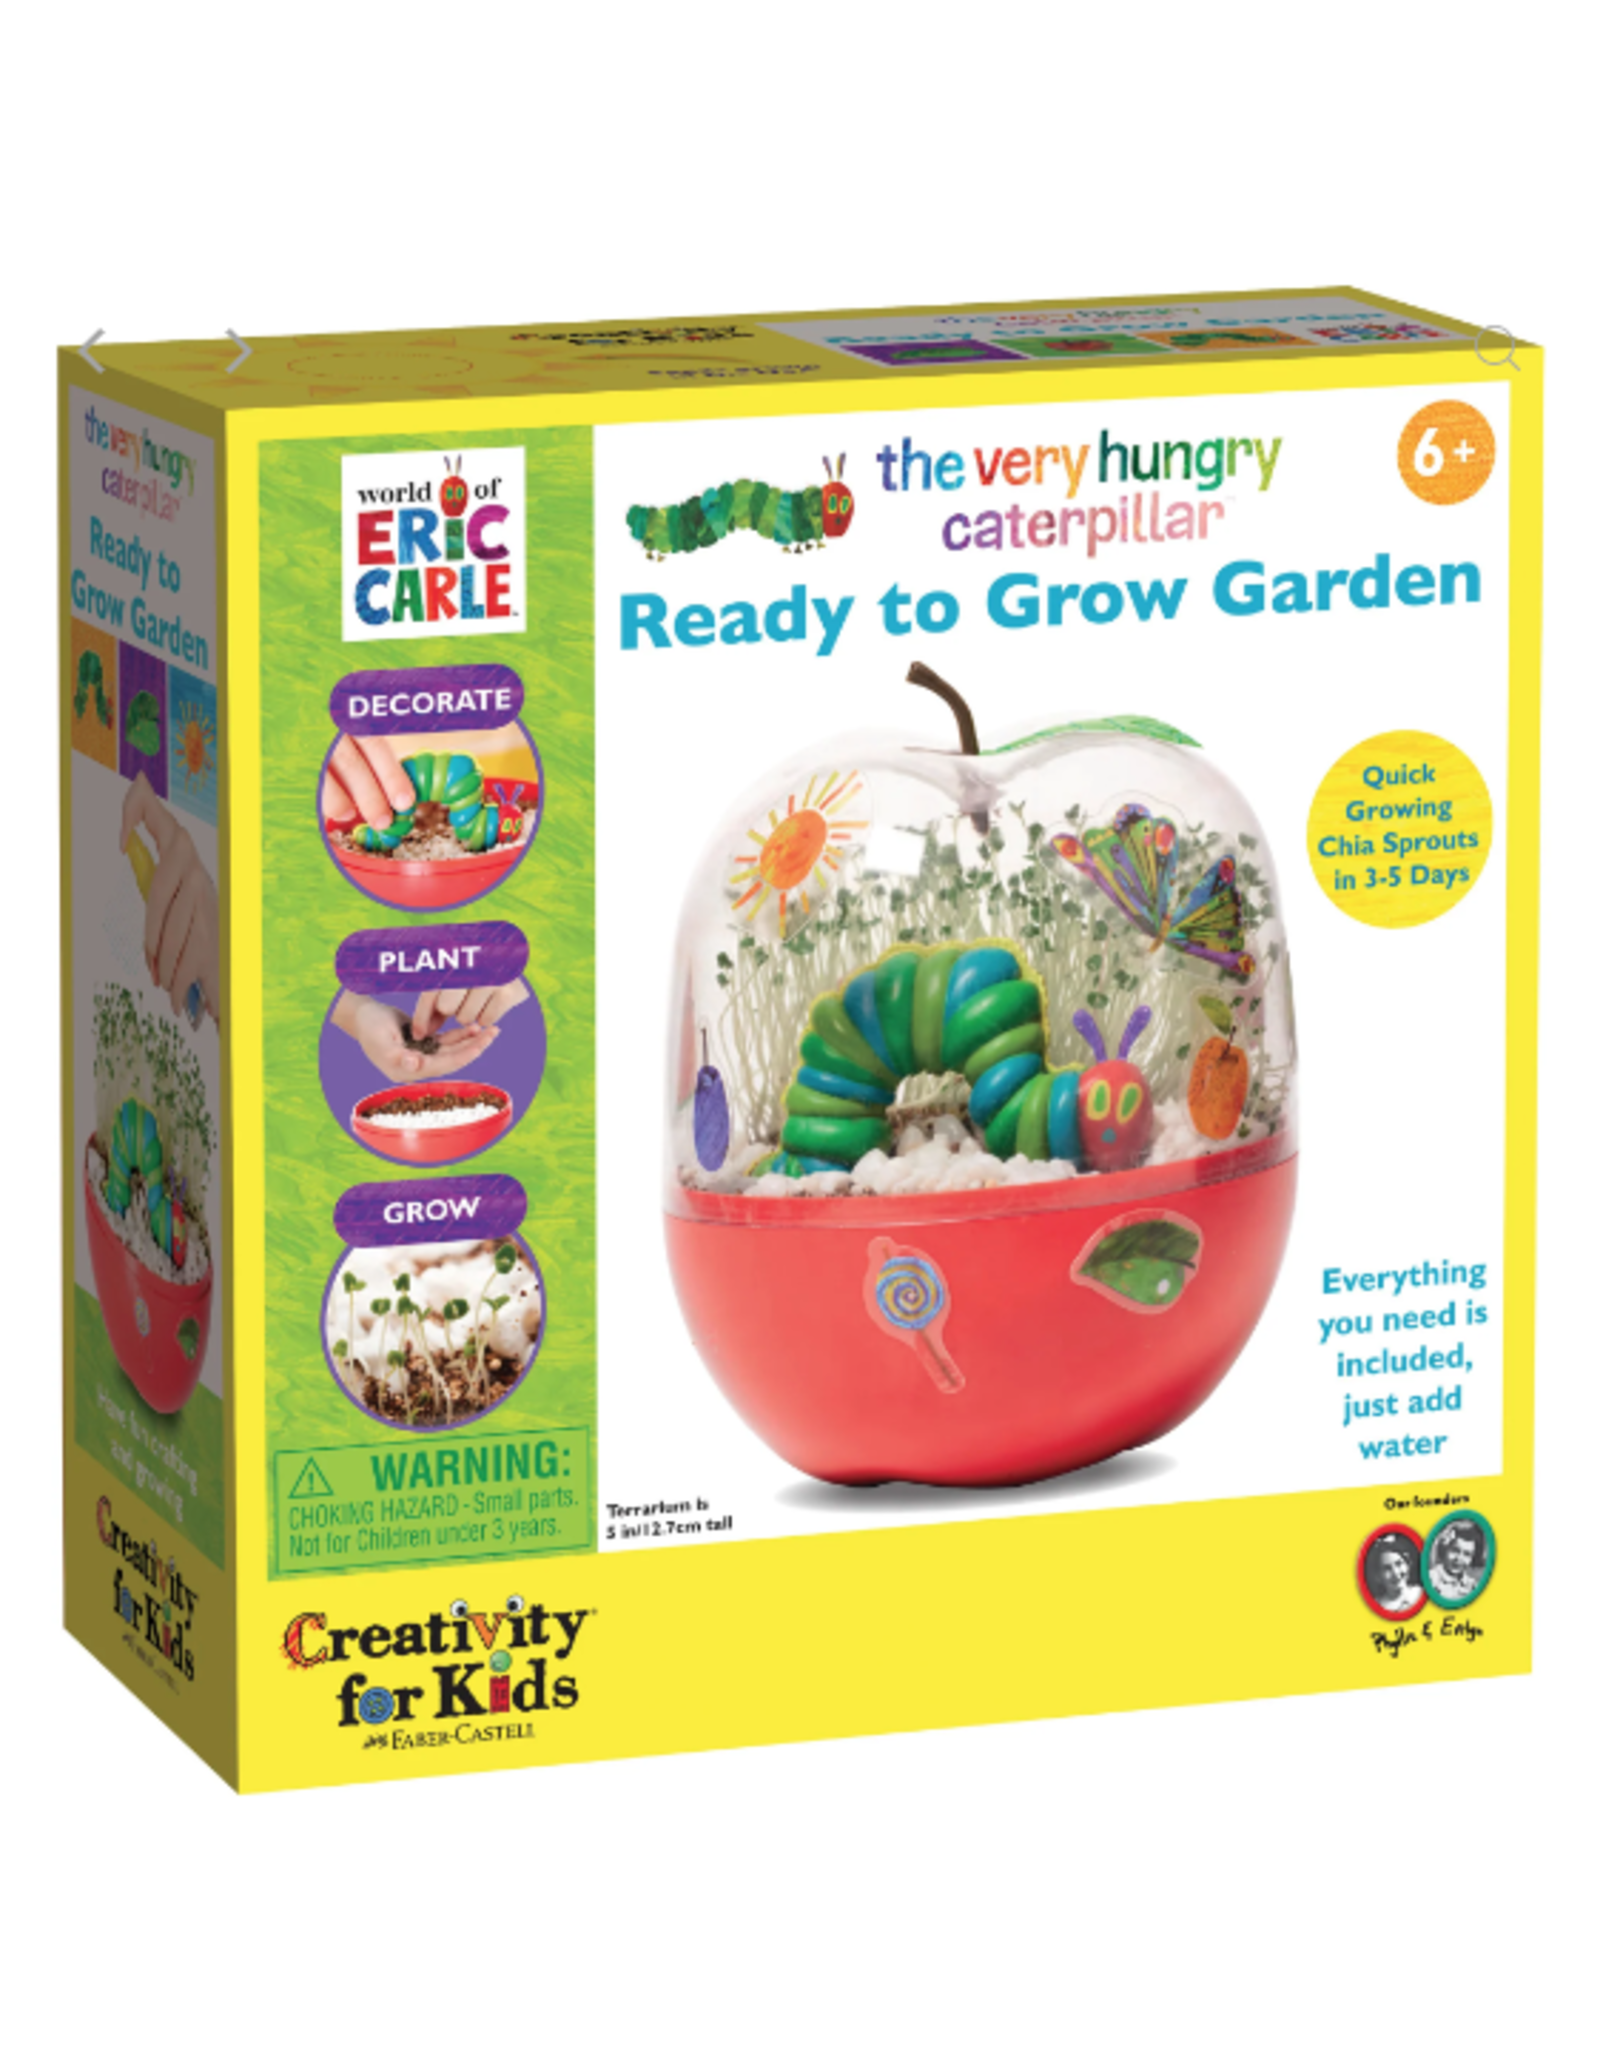 Creativity For Kids The Very Hungry Caterpillar Ready to Grow Garden